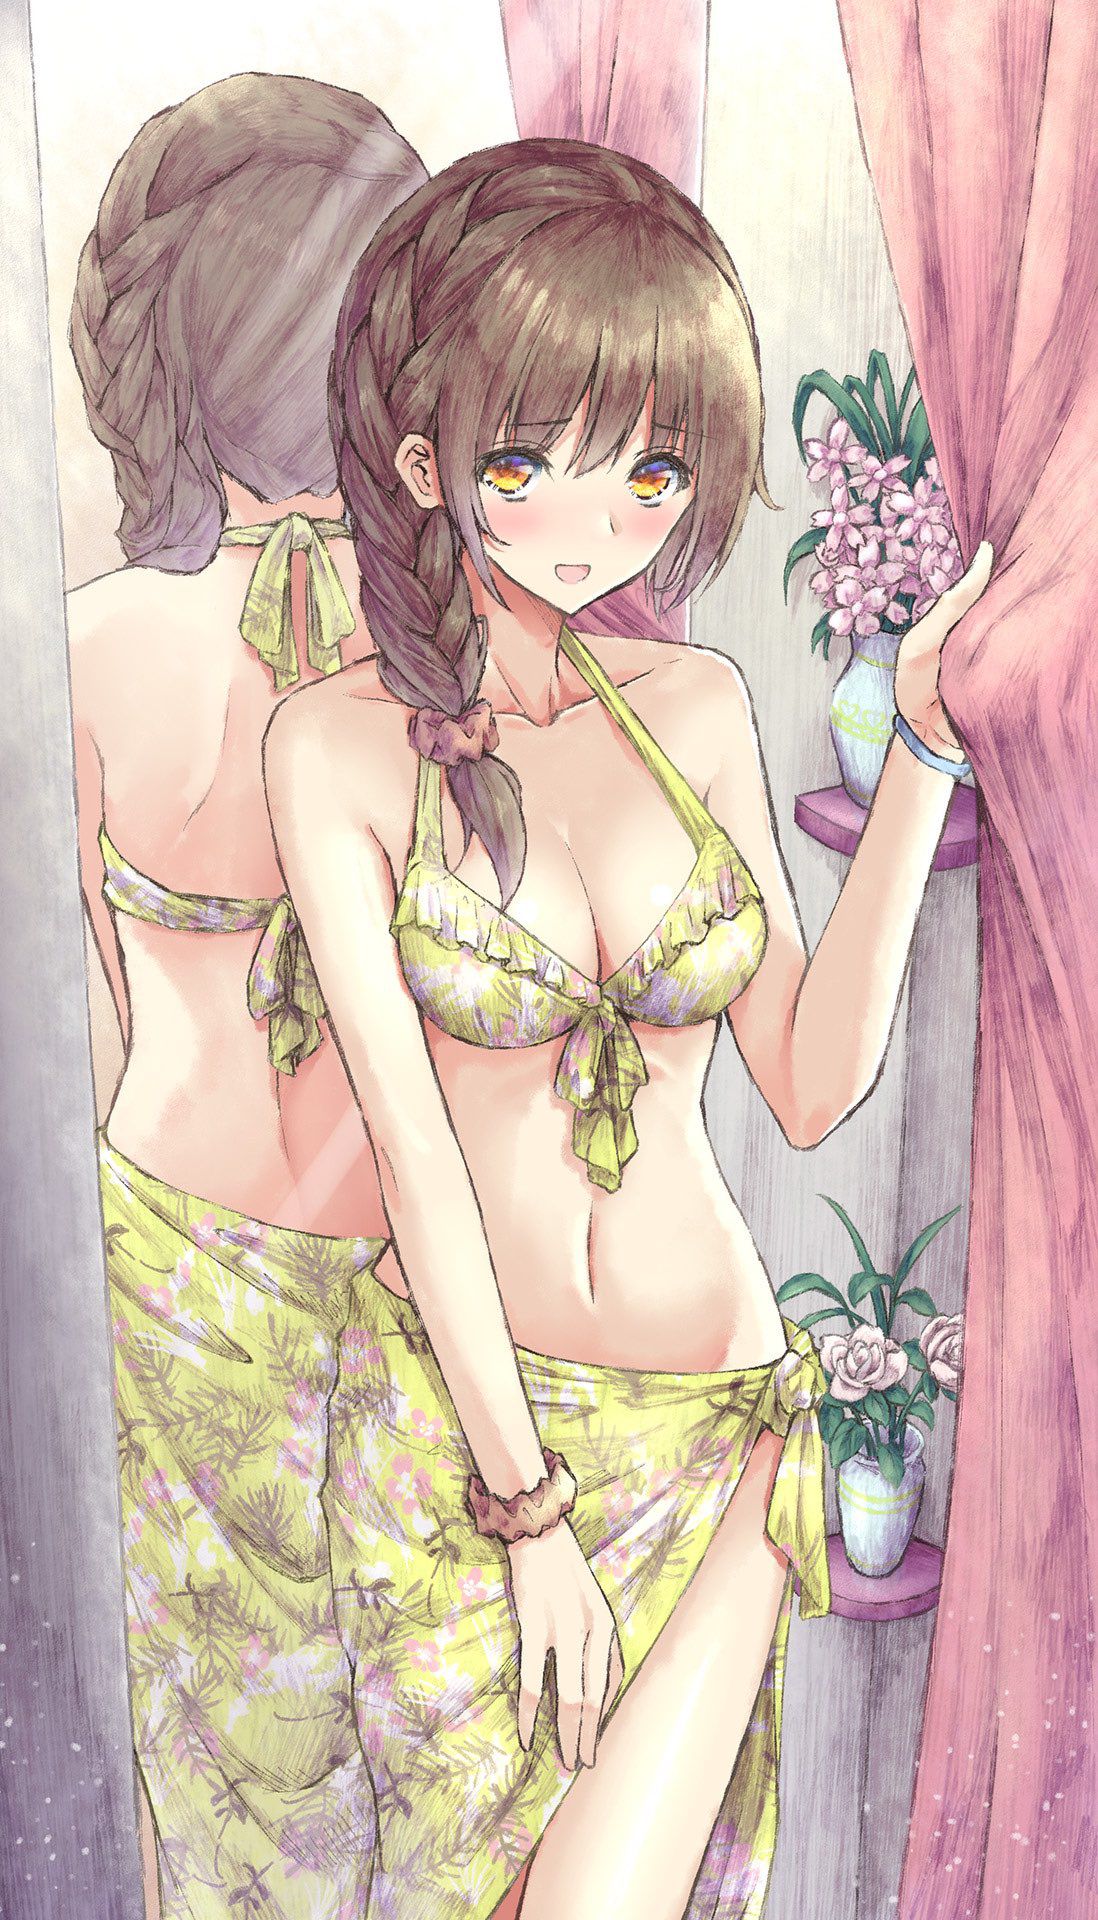 【Image】Eyemouth clerk, wwww that becomes a swimsuit before idol 4